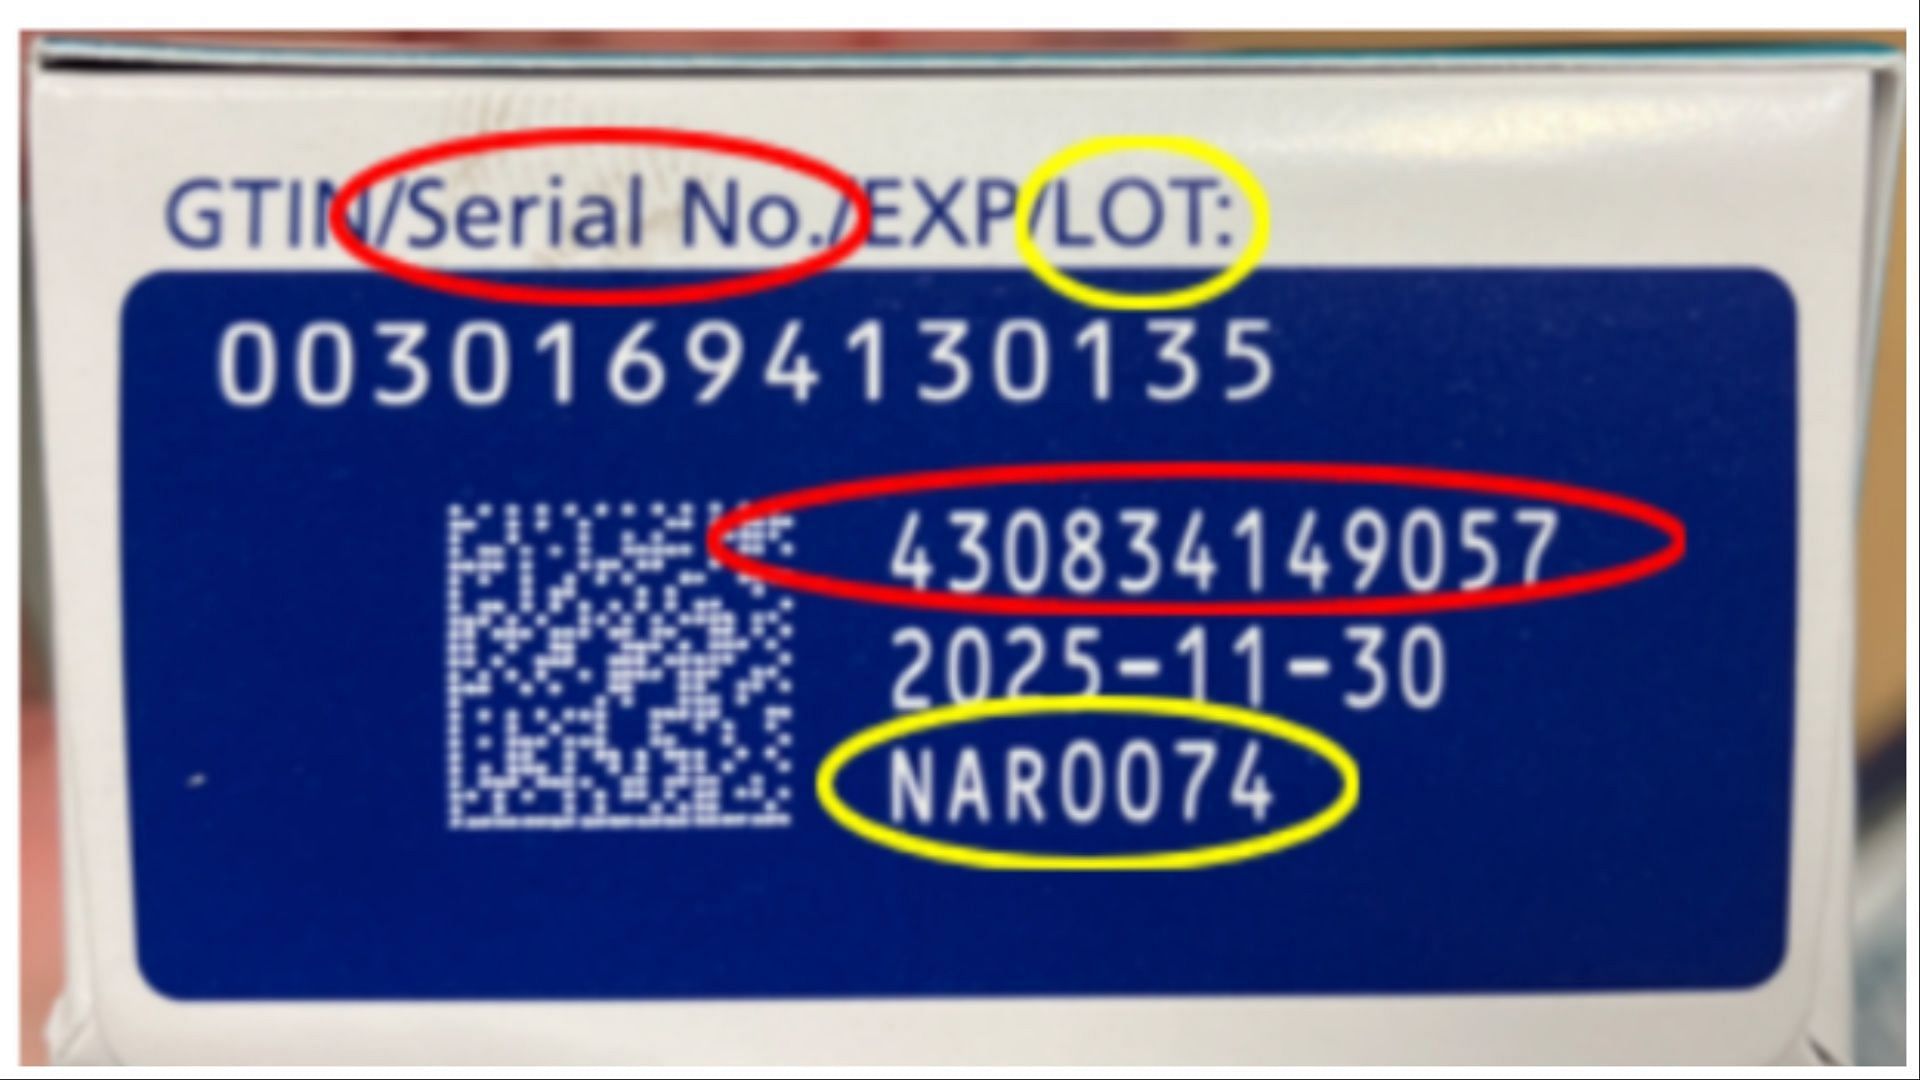 The lot no and the serial no of the fake Ozempic injections (Image via FDA)